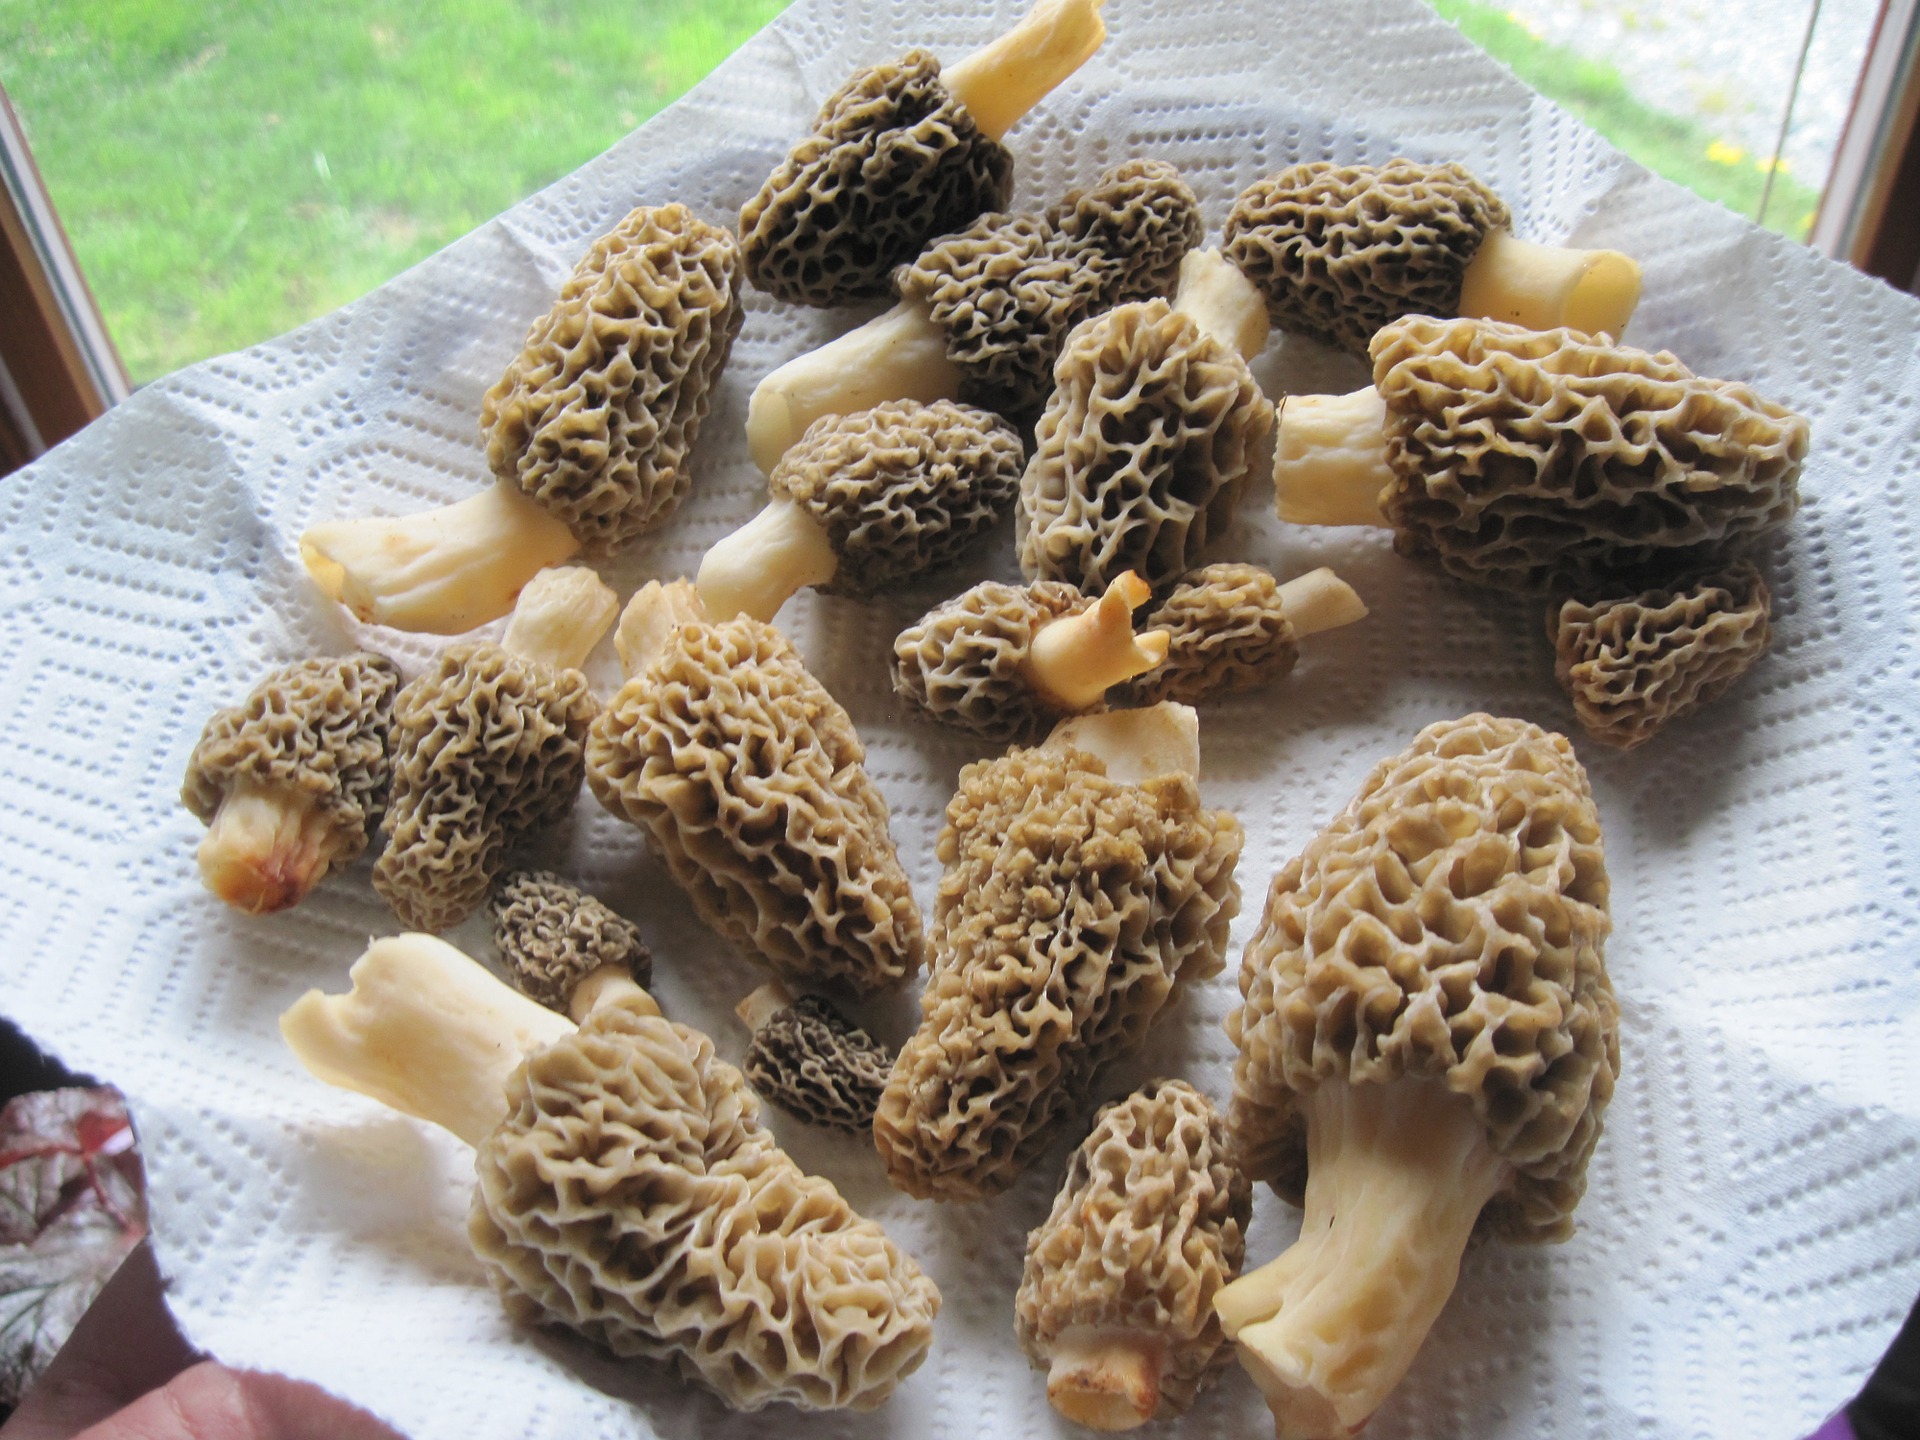 May is Morel Mushroom month, how to find them